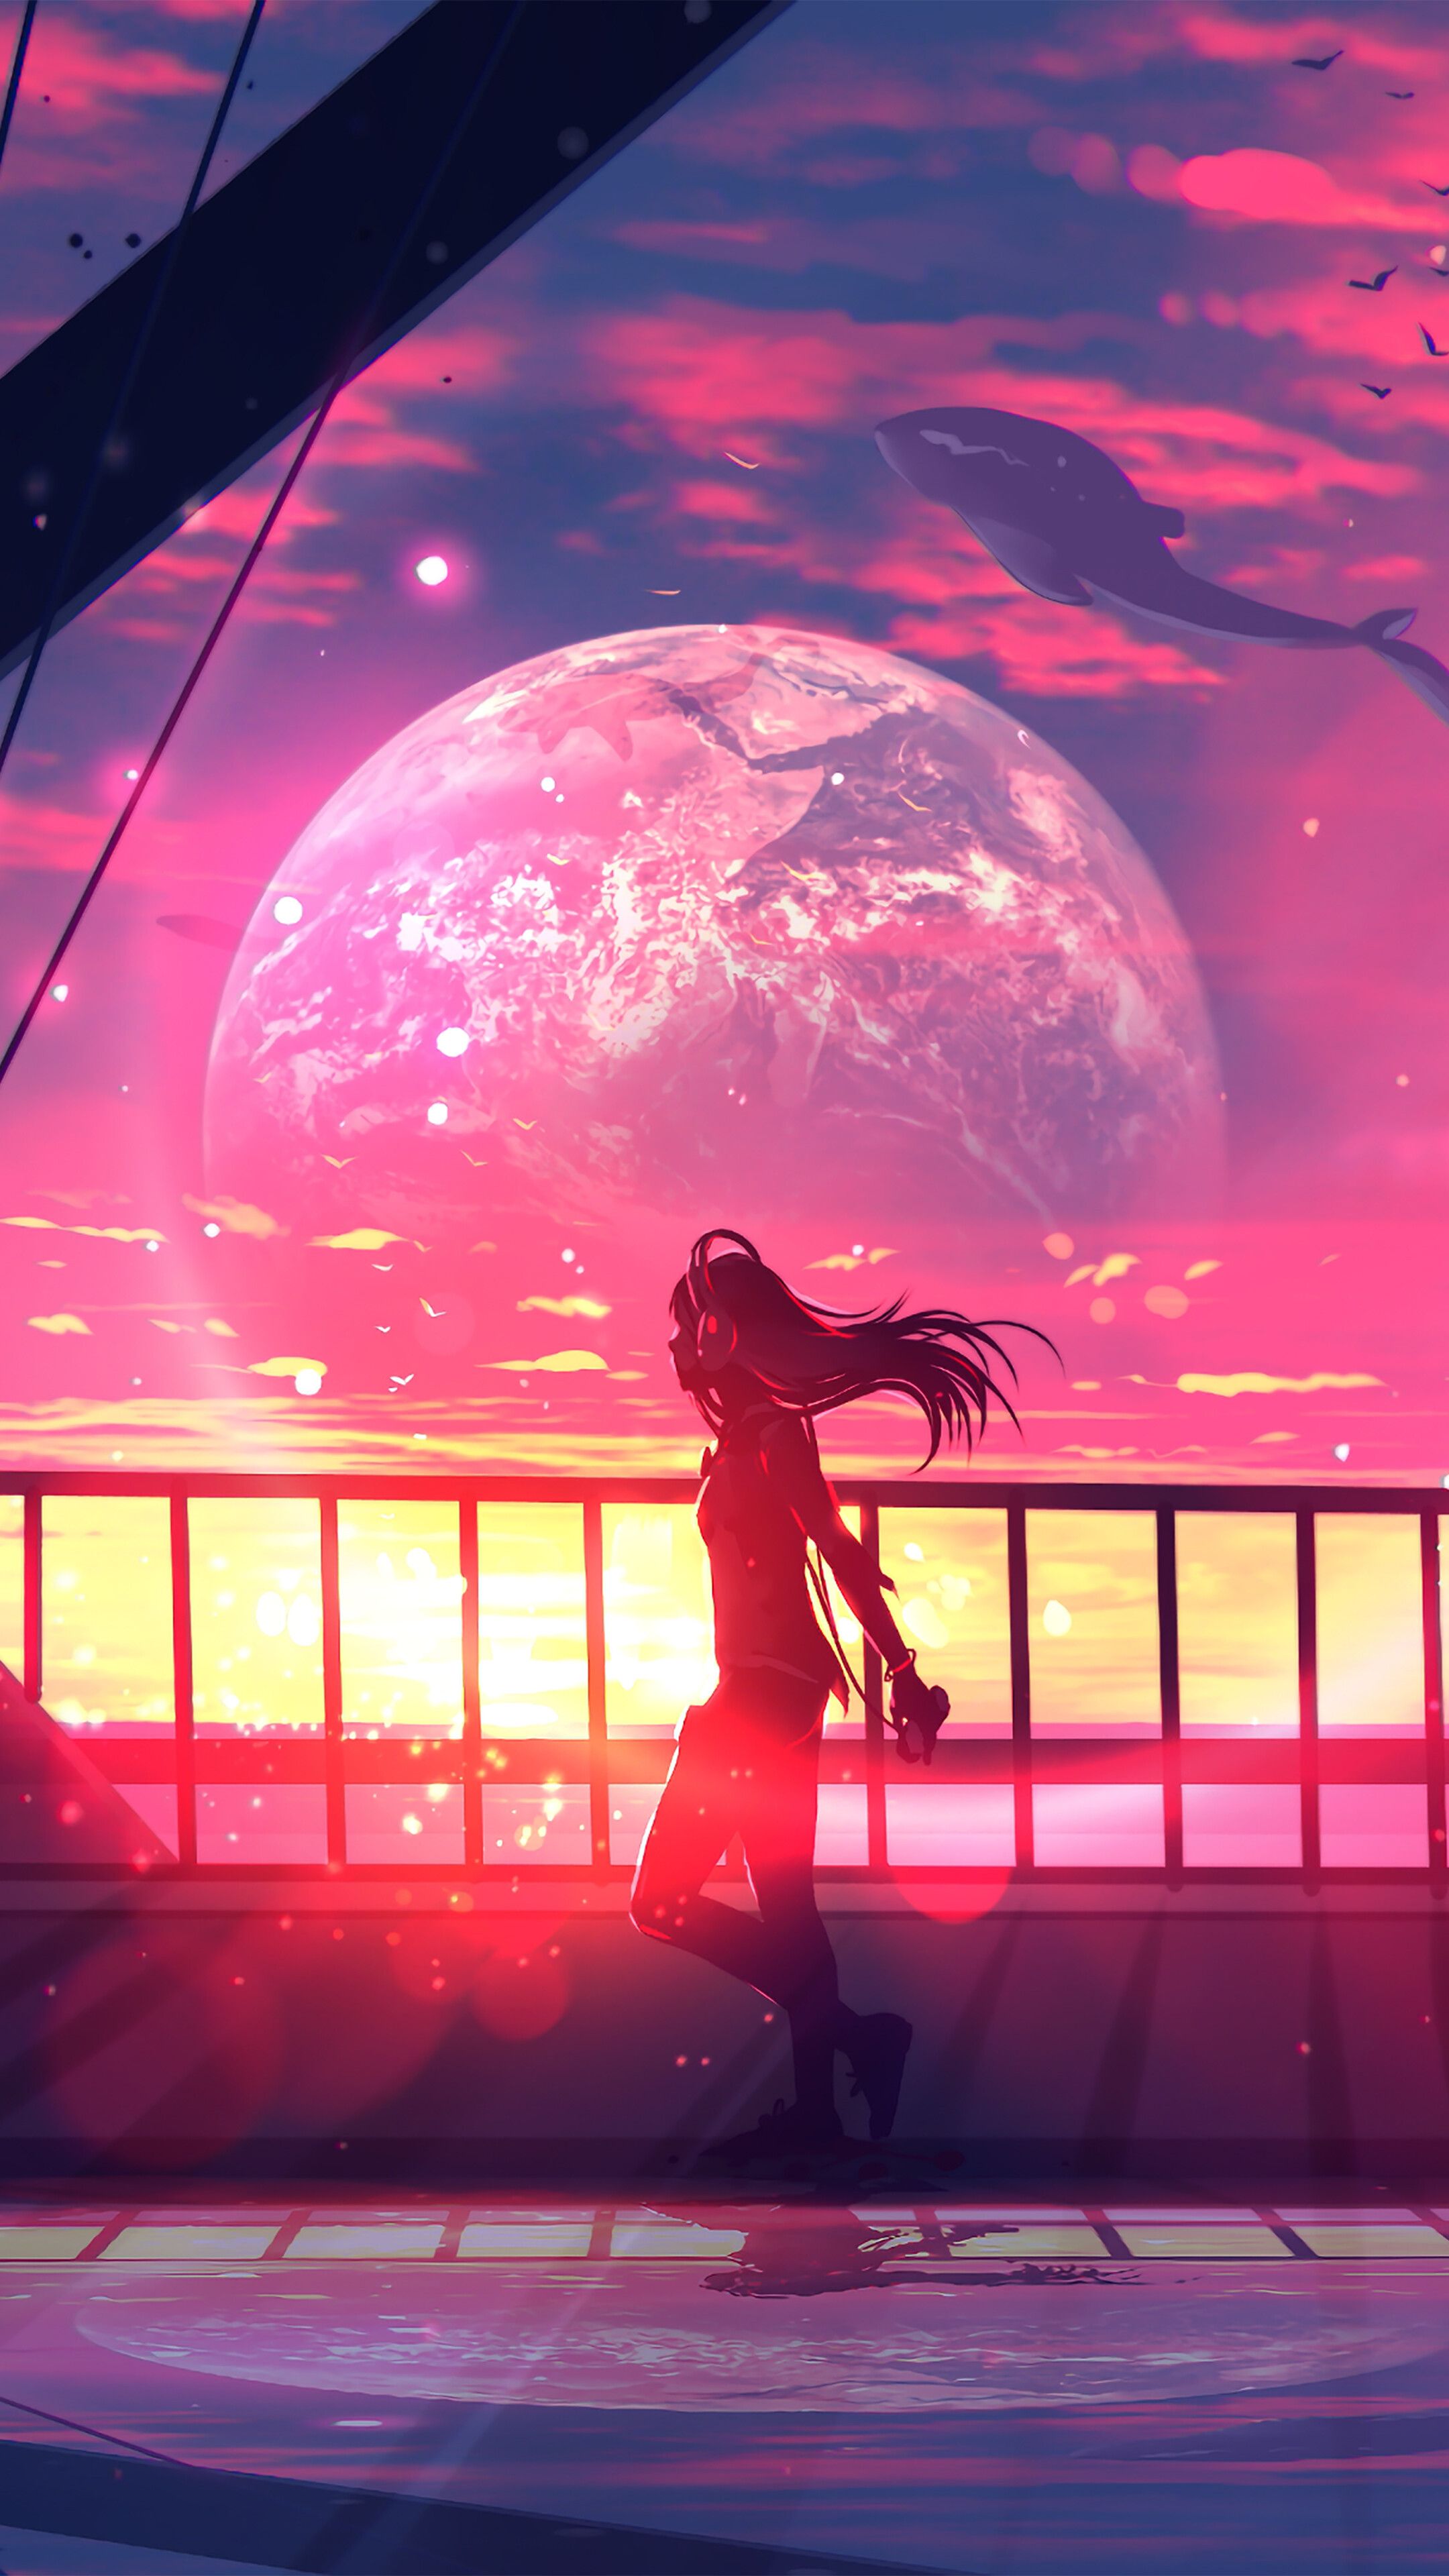 Anime, Girl, Silhouette, Sunset, Fantasy, 4K phone HD Wallpaper, Image, Background, Photo and Picture. Mocah HD Wallpaper